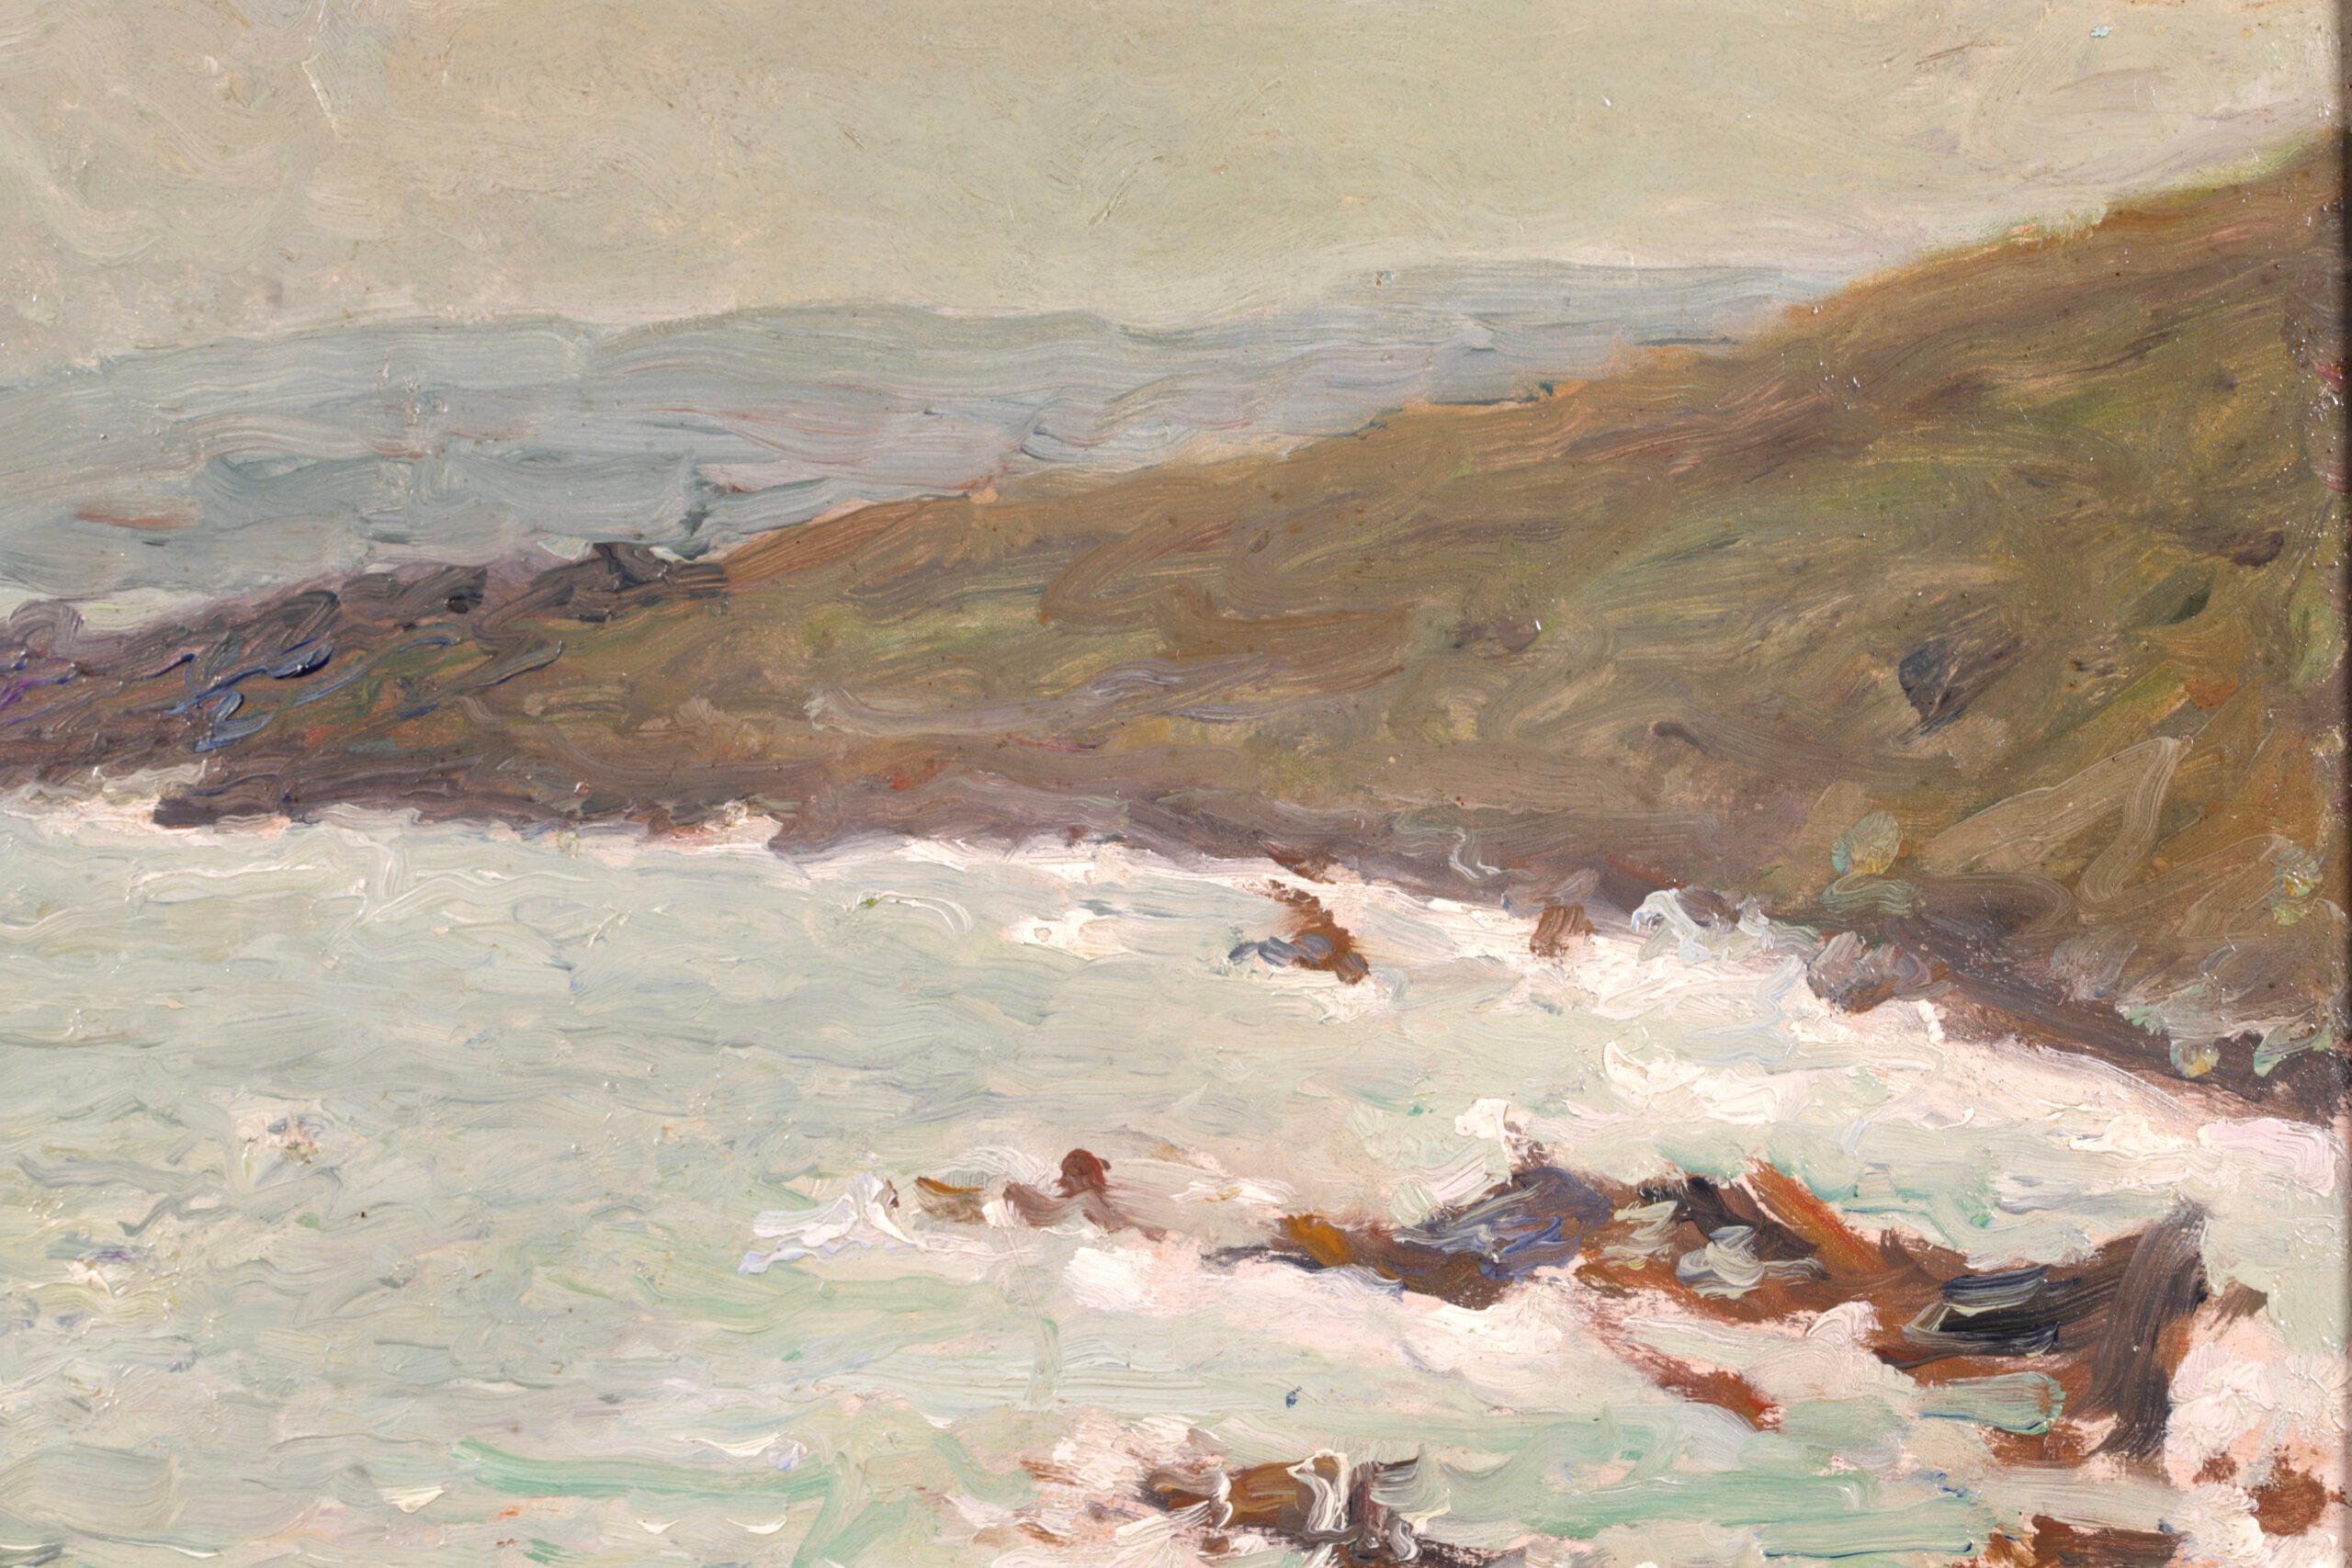 A beautiful oil on panel circa 1900 by French impressionist painter Emilio Boggio. The piece depicts a coastal scene. The blue-green water crashes against the rocks on a grey day.

Signature:
Signed lower left/titled verso

Dimensions:
Framed: